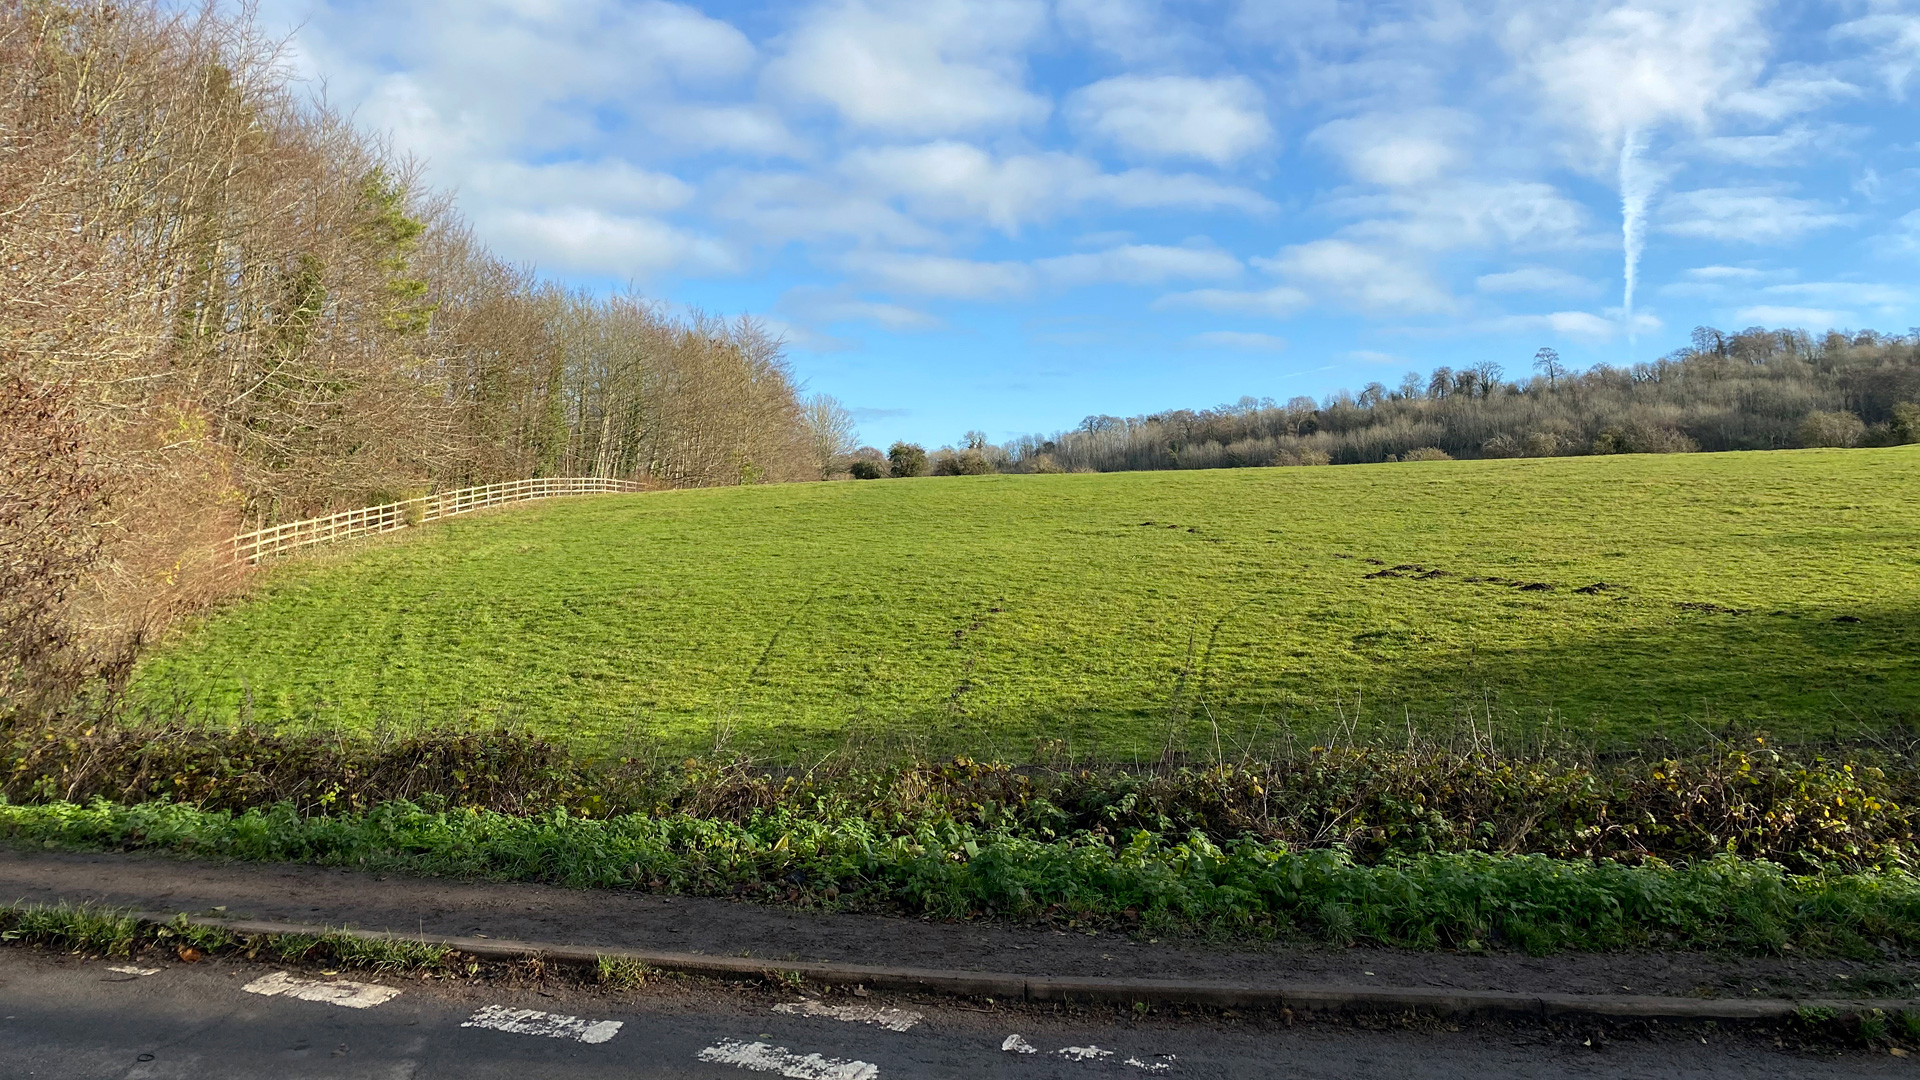 Land for sale in West Leith, Tring